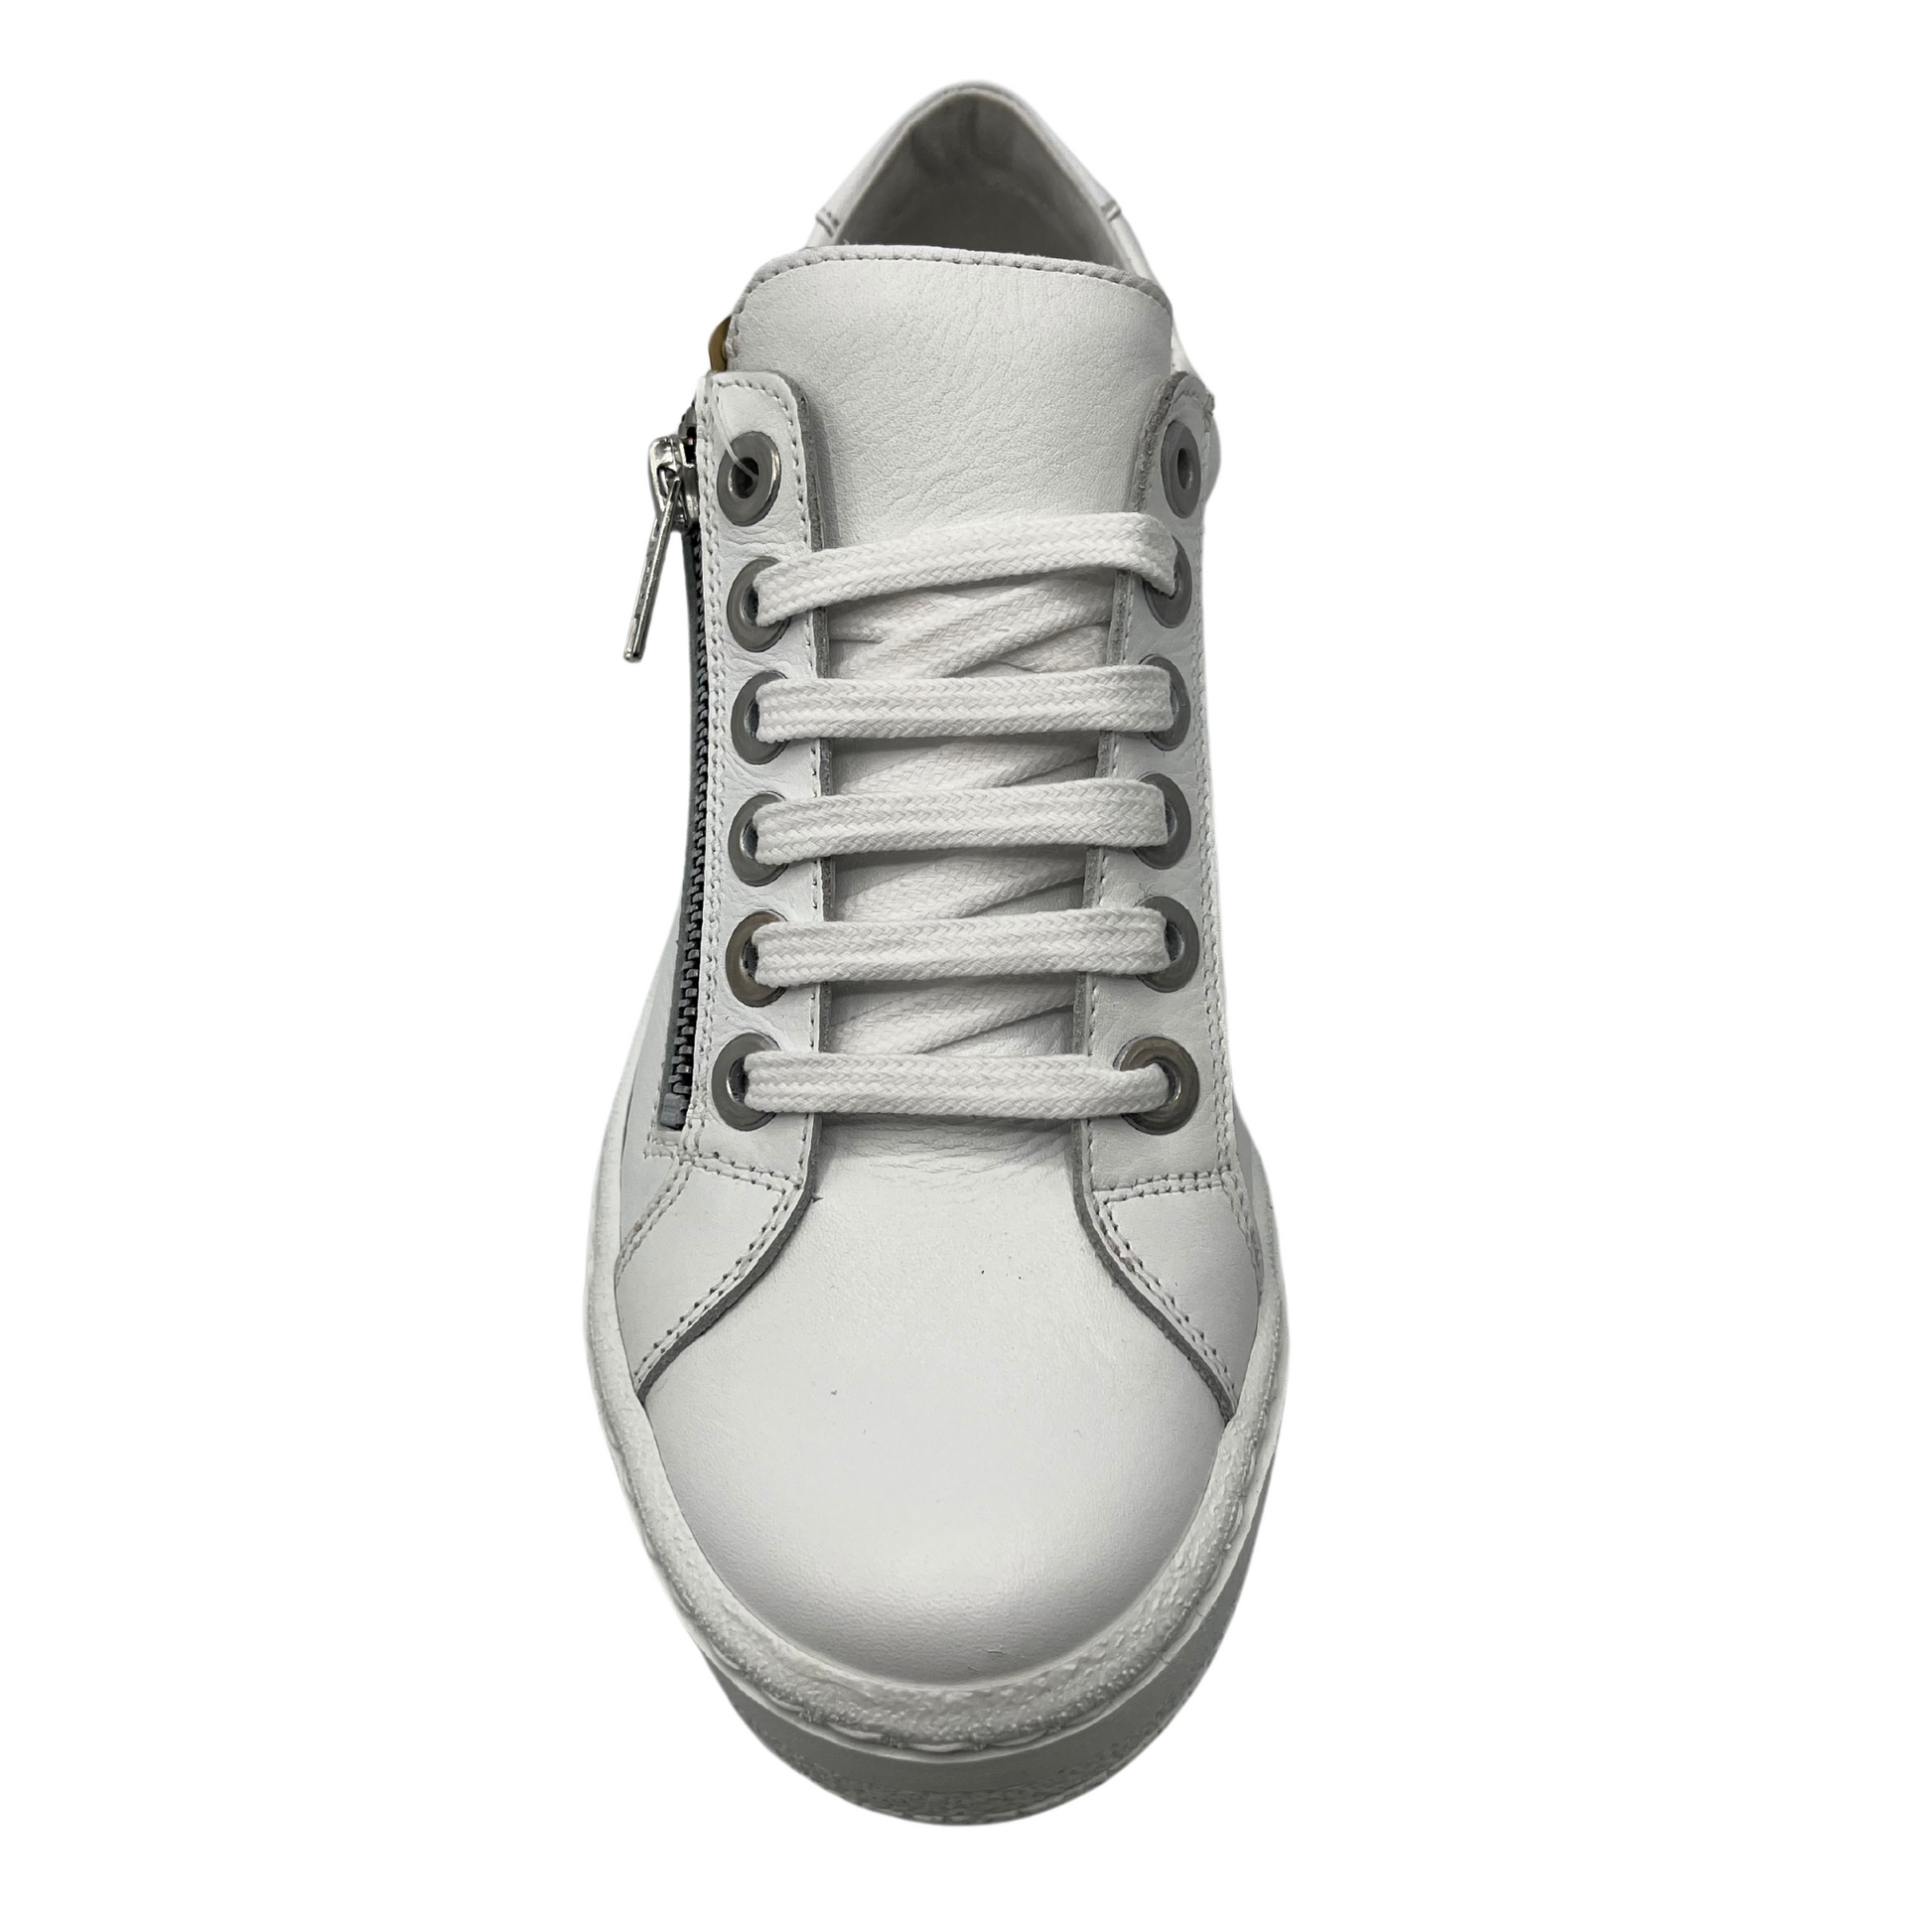 Top view of white leather sneaker with matching laces and side zipper closure